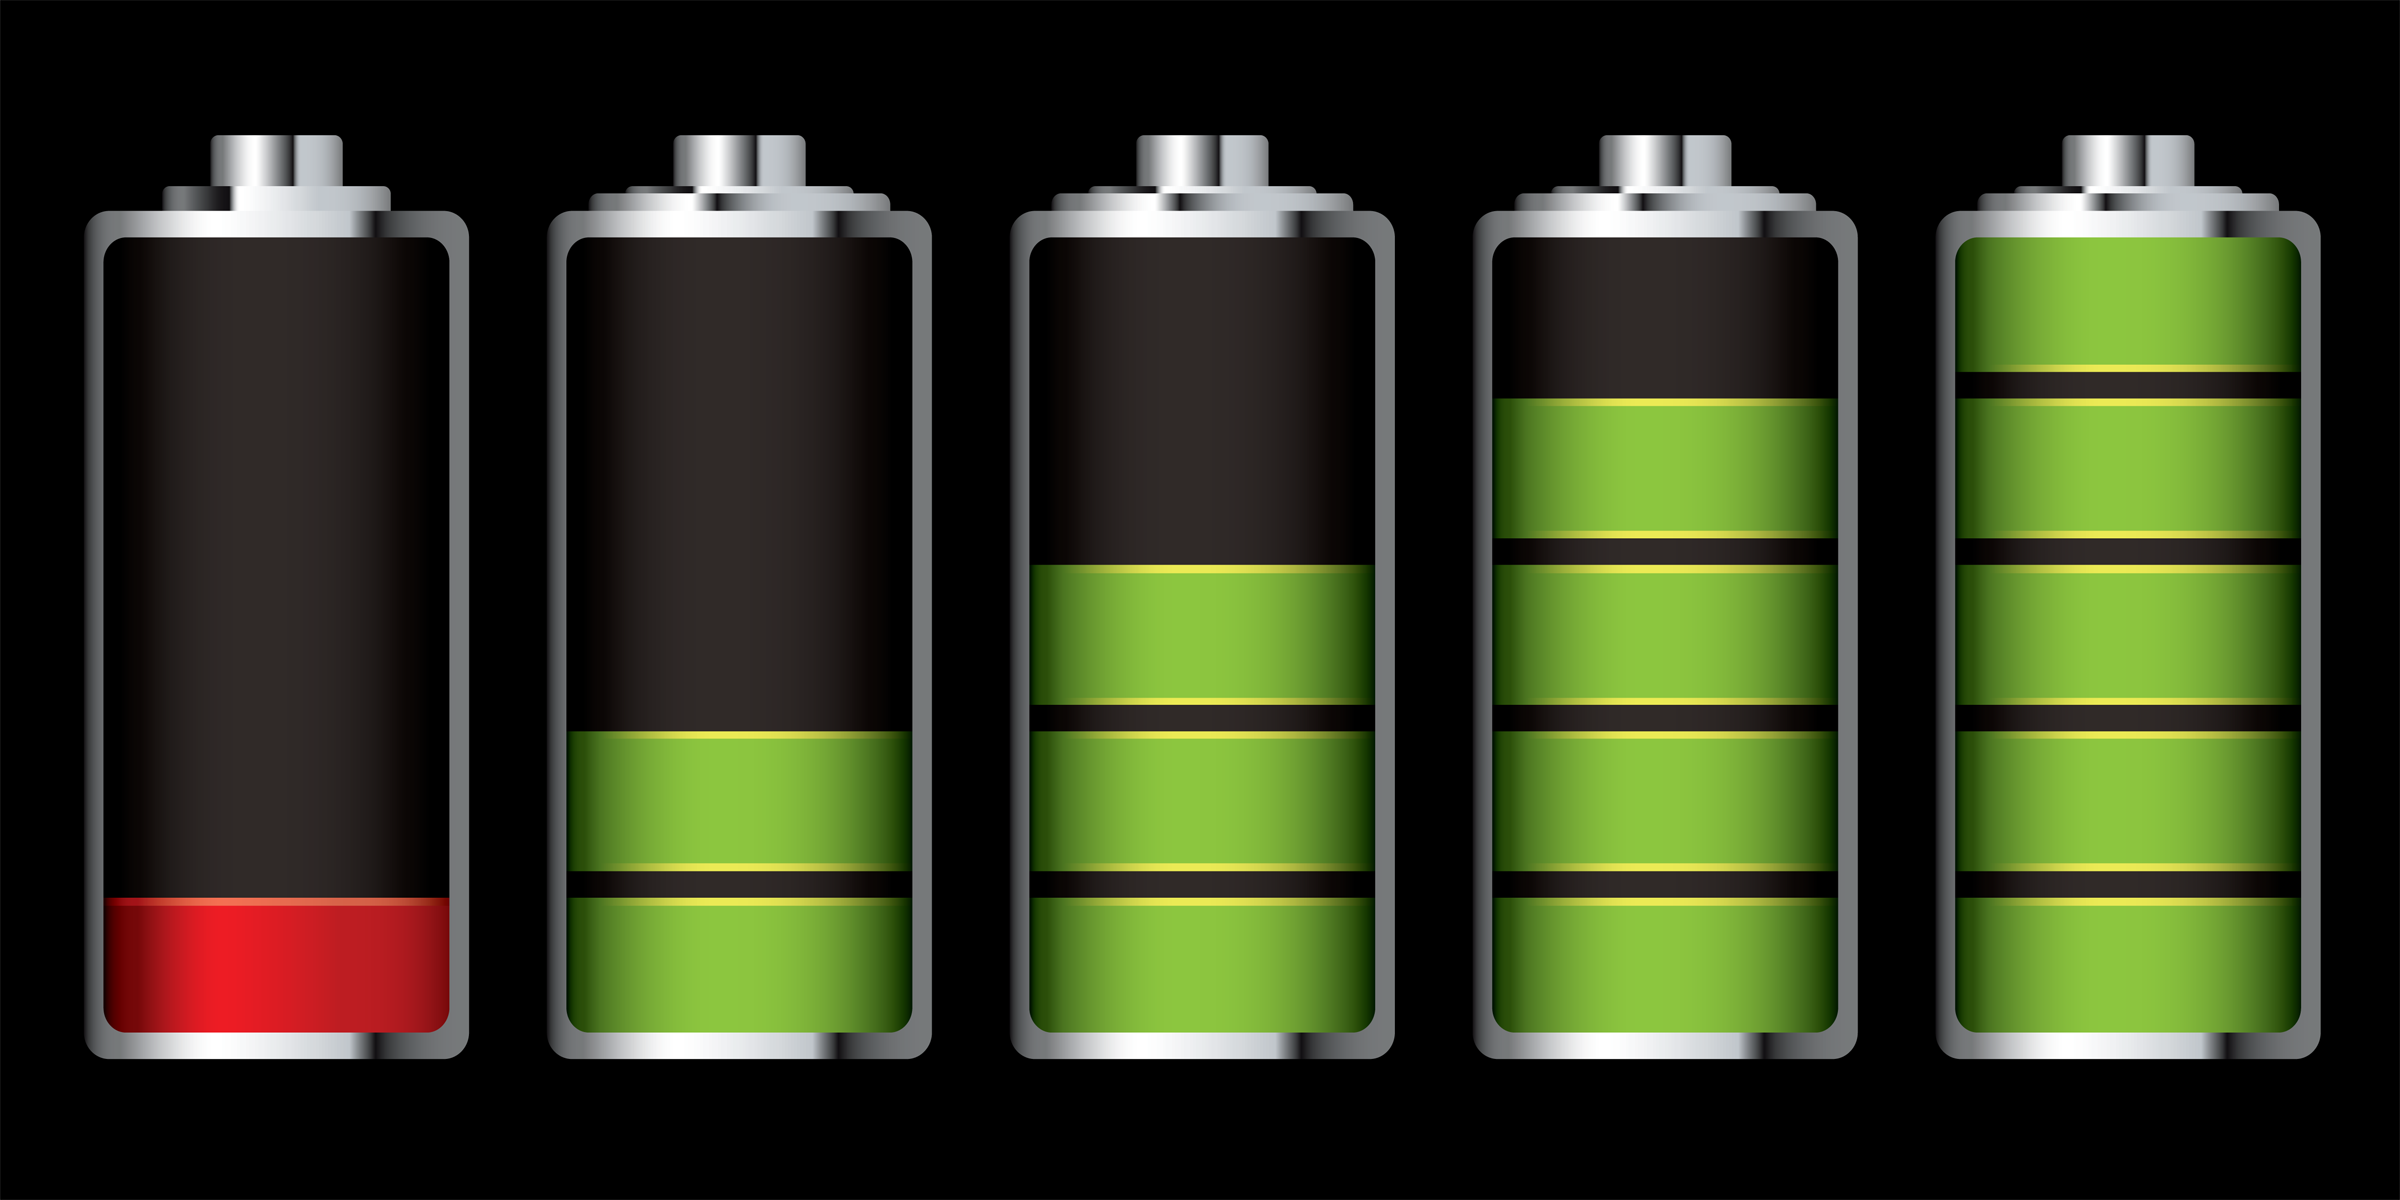 Ukrainian Scientist Creates Battery That Can Power Smartphones for 12